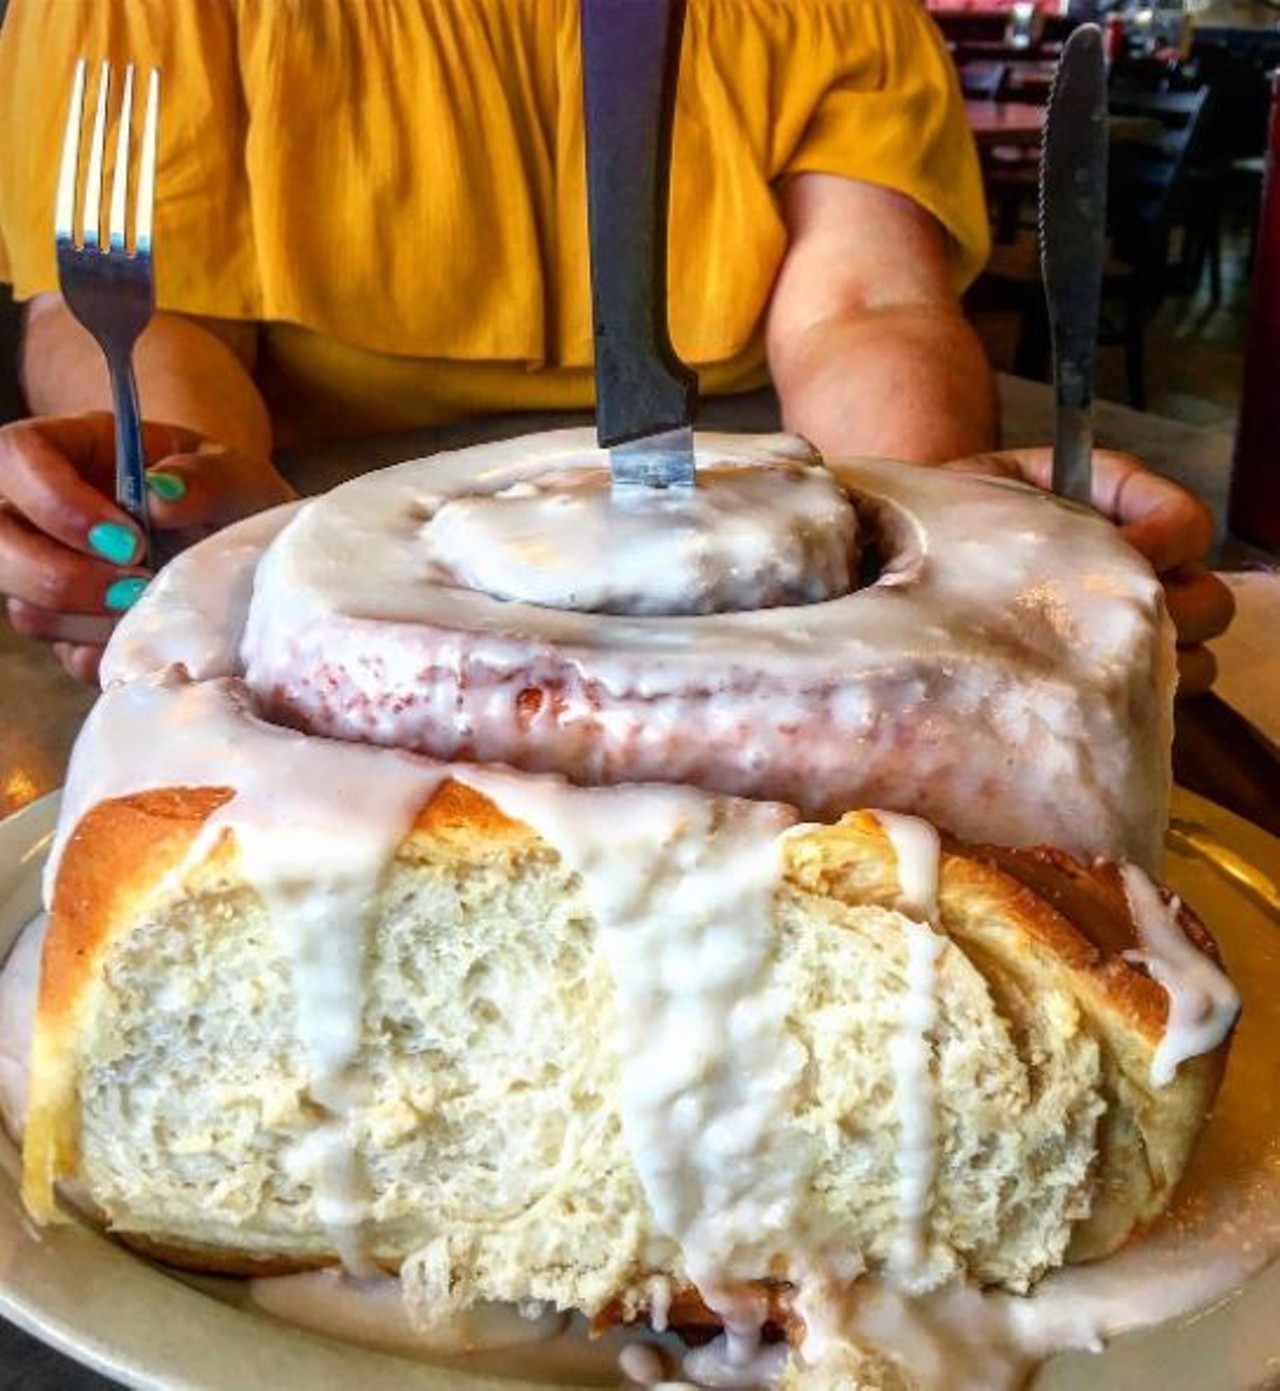 Bigger is better, especially when it comes to food
We ain&#146;t here for a long time. We here for a good time.
Photo via Instagram, hangrymarz